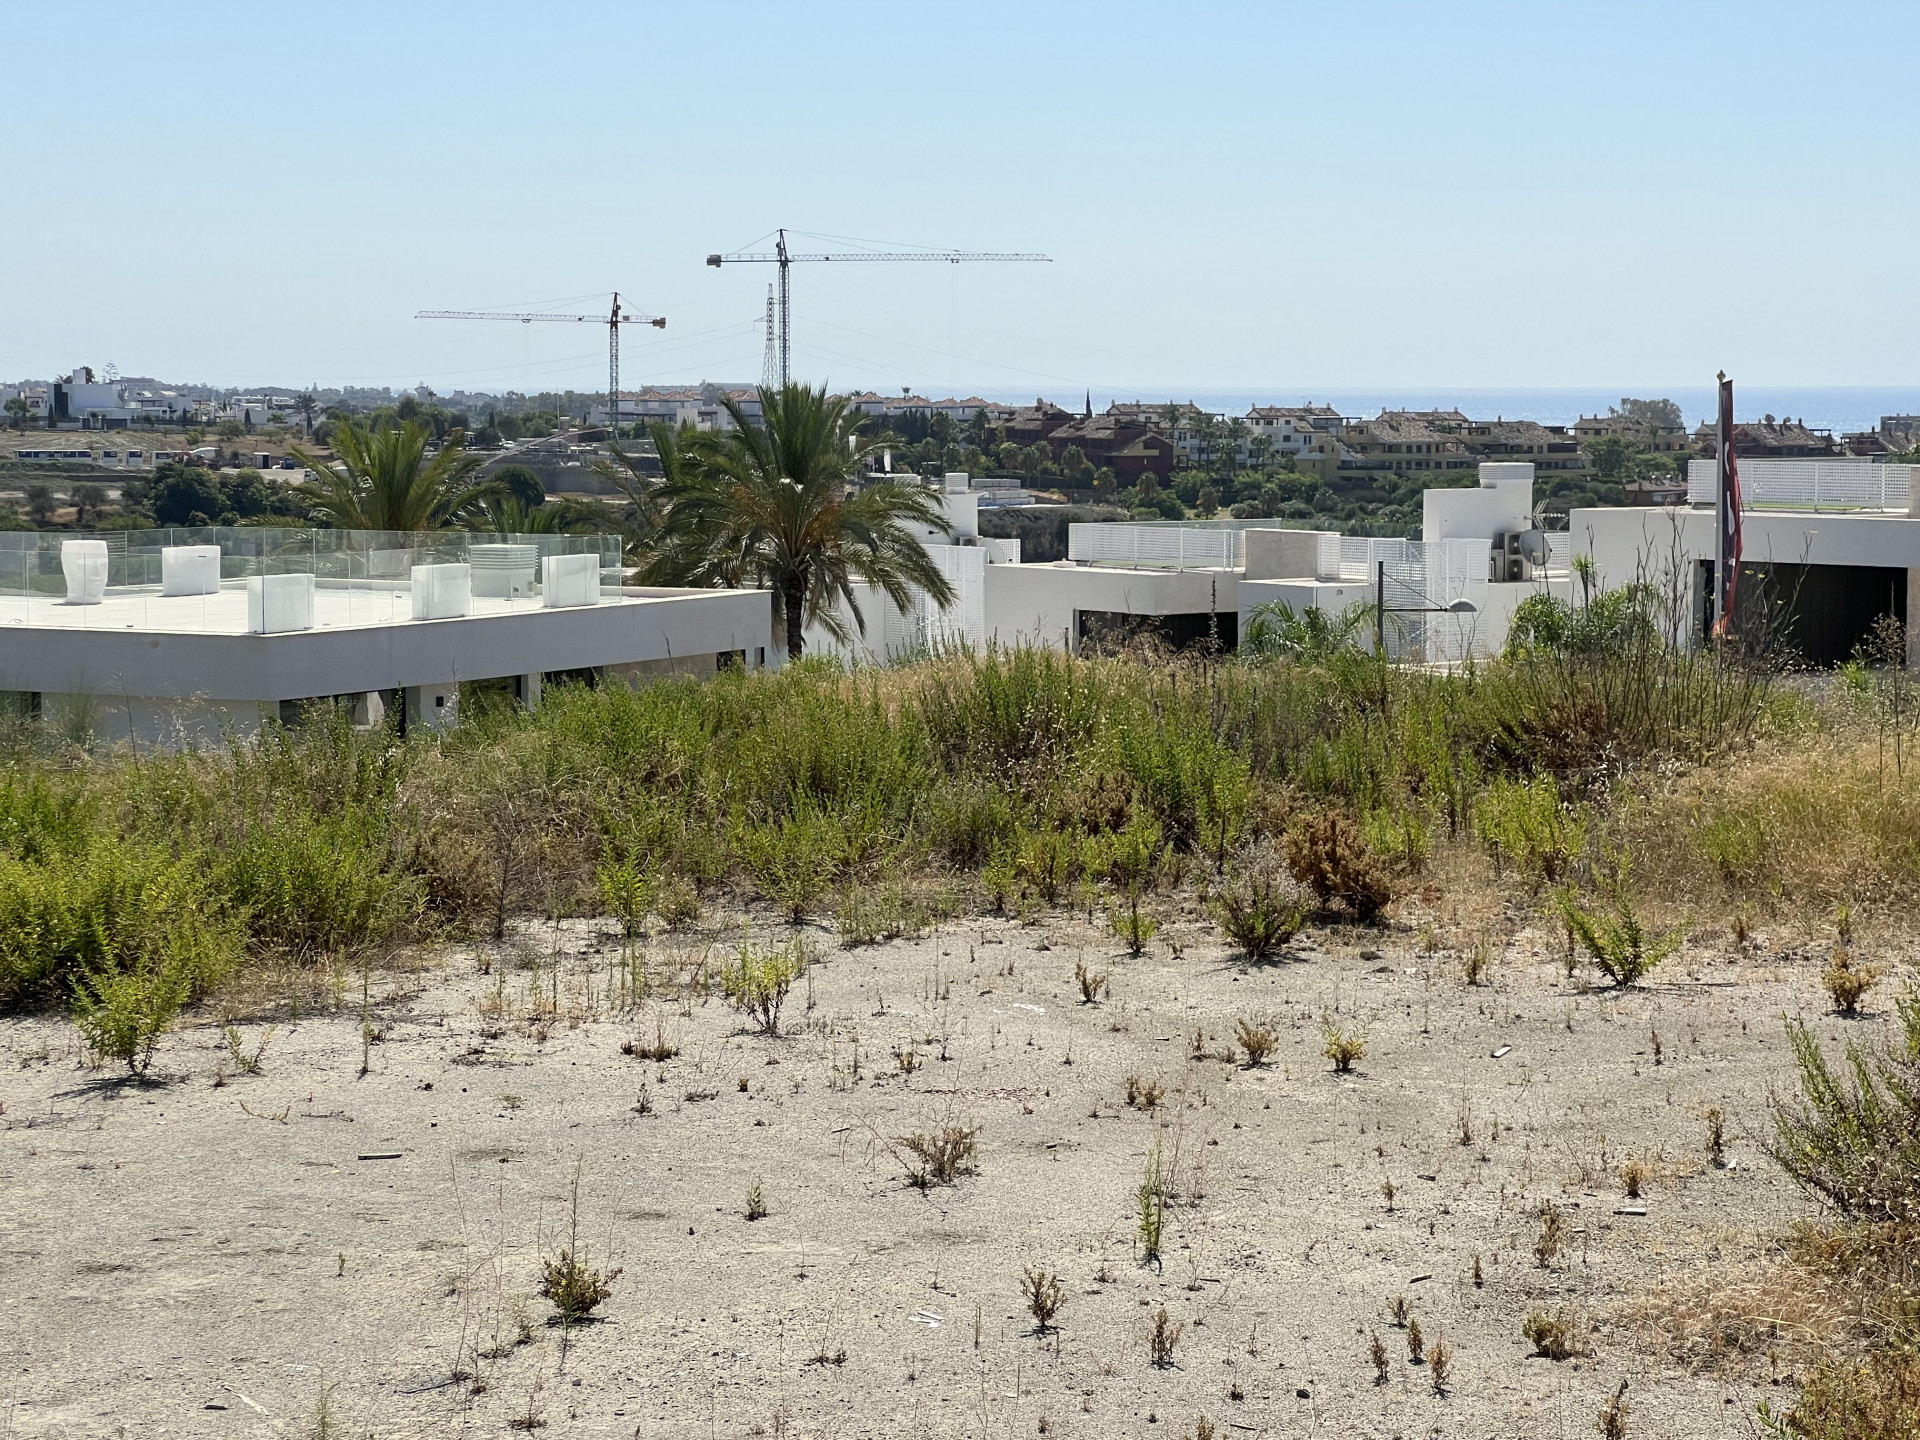 Residential plot for sale very close to Cancelada  village with nice sea and mountain views  near to every amenity.